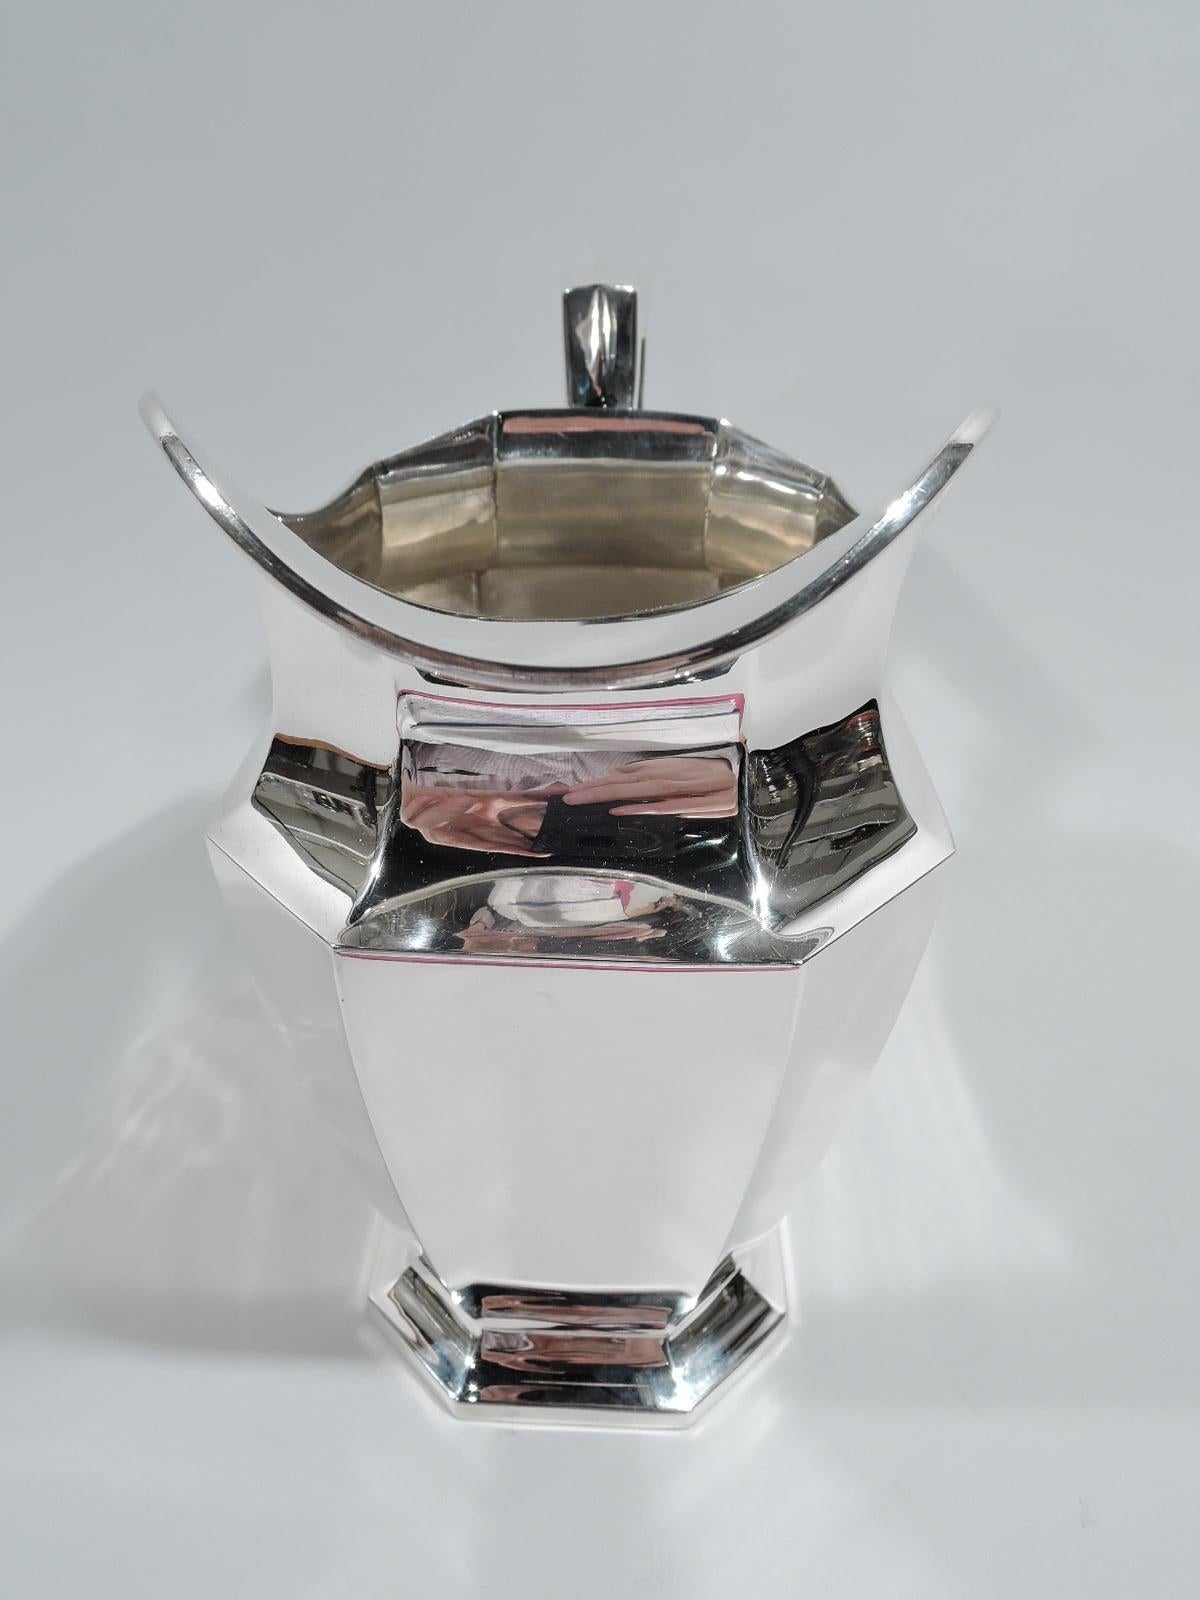 Fairfax sterling silver water pitcher. Made by Durgin (part of Gorham) in Concord, New Hampshire, ca 1920. Faceted with rectilinear body and raised foot, and helmet mouth. Scroll-bracket handle. A desirable piece in the classic Art Deco pattern.